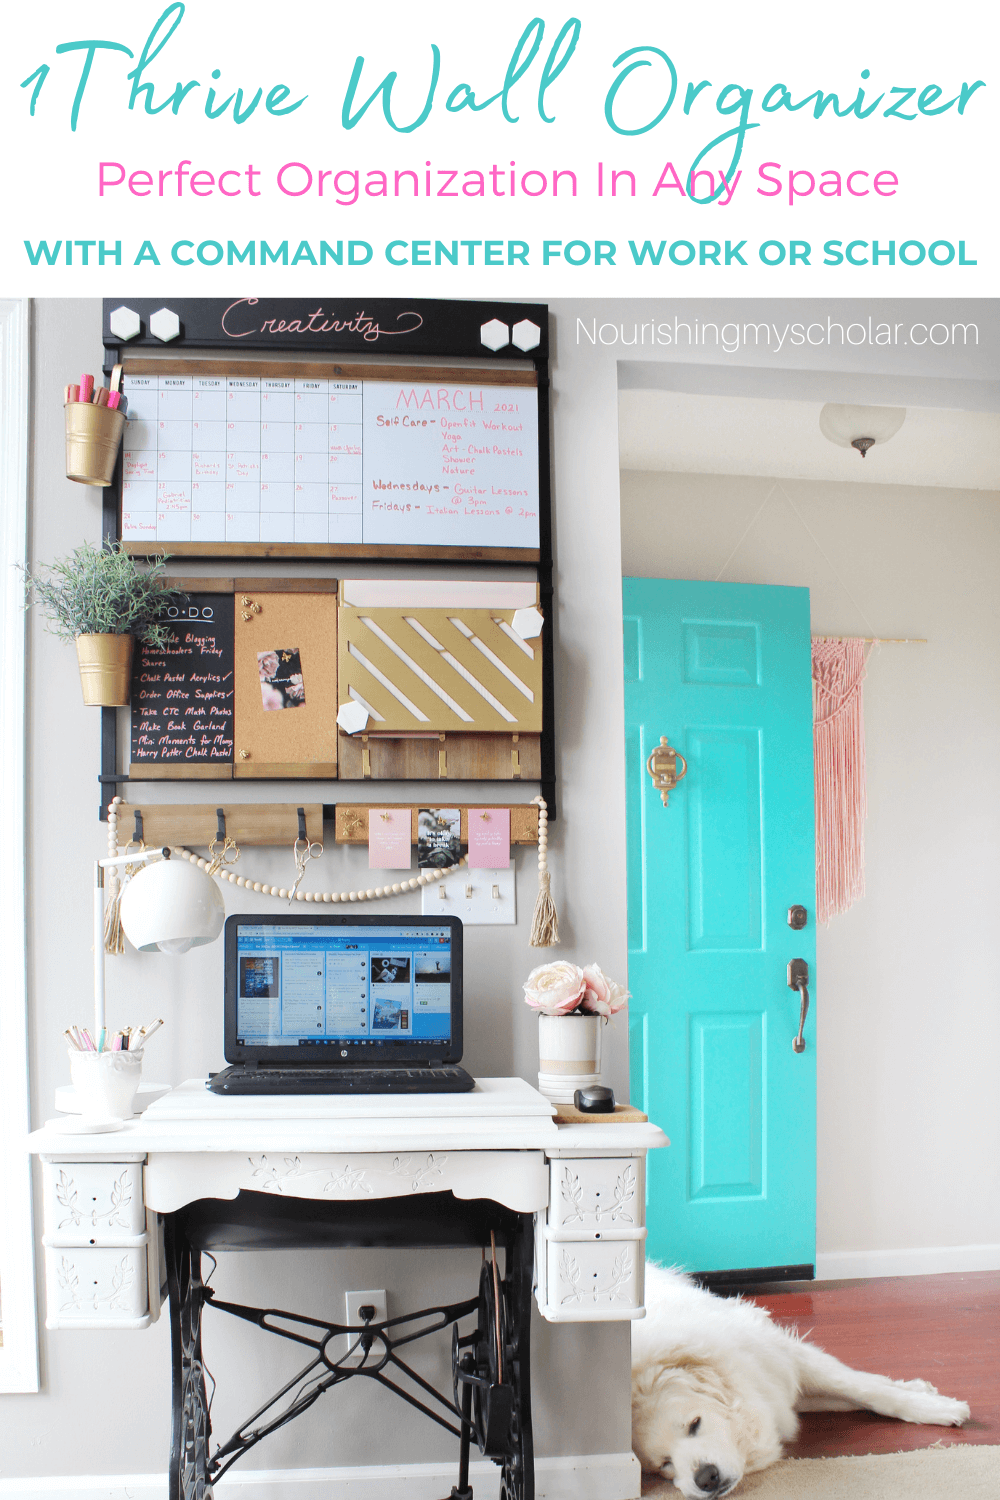 Getting Organized with a 1Thrive Wall Organizer: If your looking for a wall organizer for your home office, homeschool space, or family space then check out my review of 1Thrive's Susan command center! It is perfect for organizing schedules, papers, documents, and more! #commandcenter #familyorganization #familywallorganizer #homeoffice #homeschoolwallorganizer #officespacerefresh #officespaceupdate #officewallorganizer #organization #organizationideas #organizedhome #wallorganization